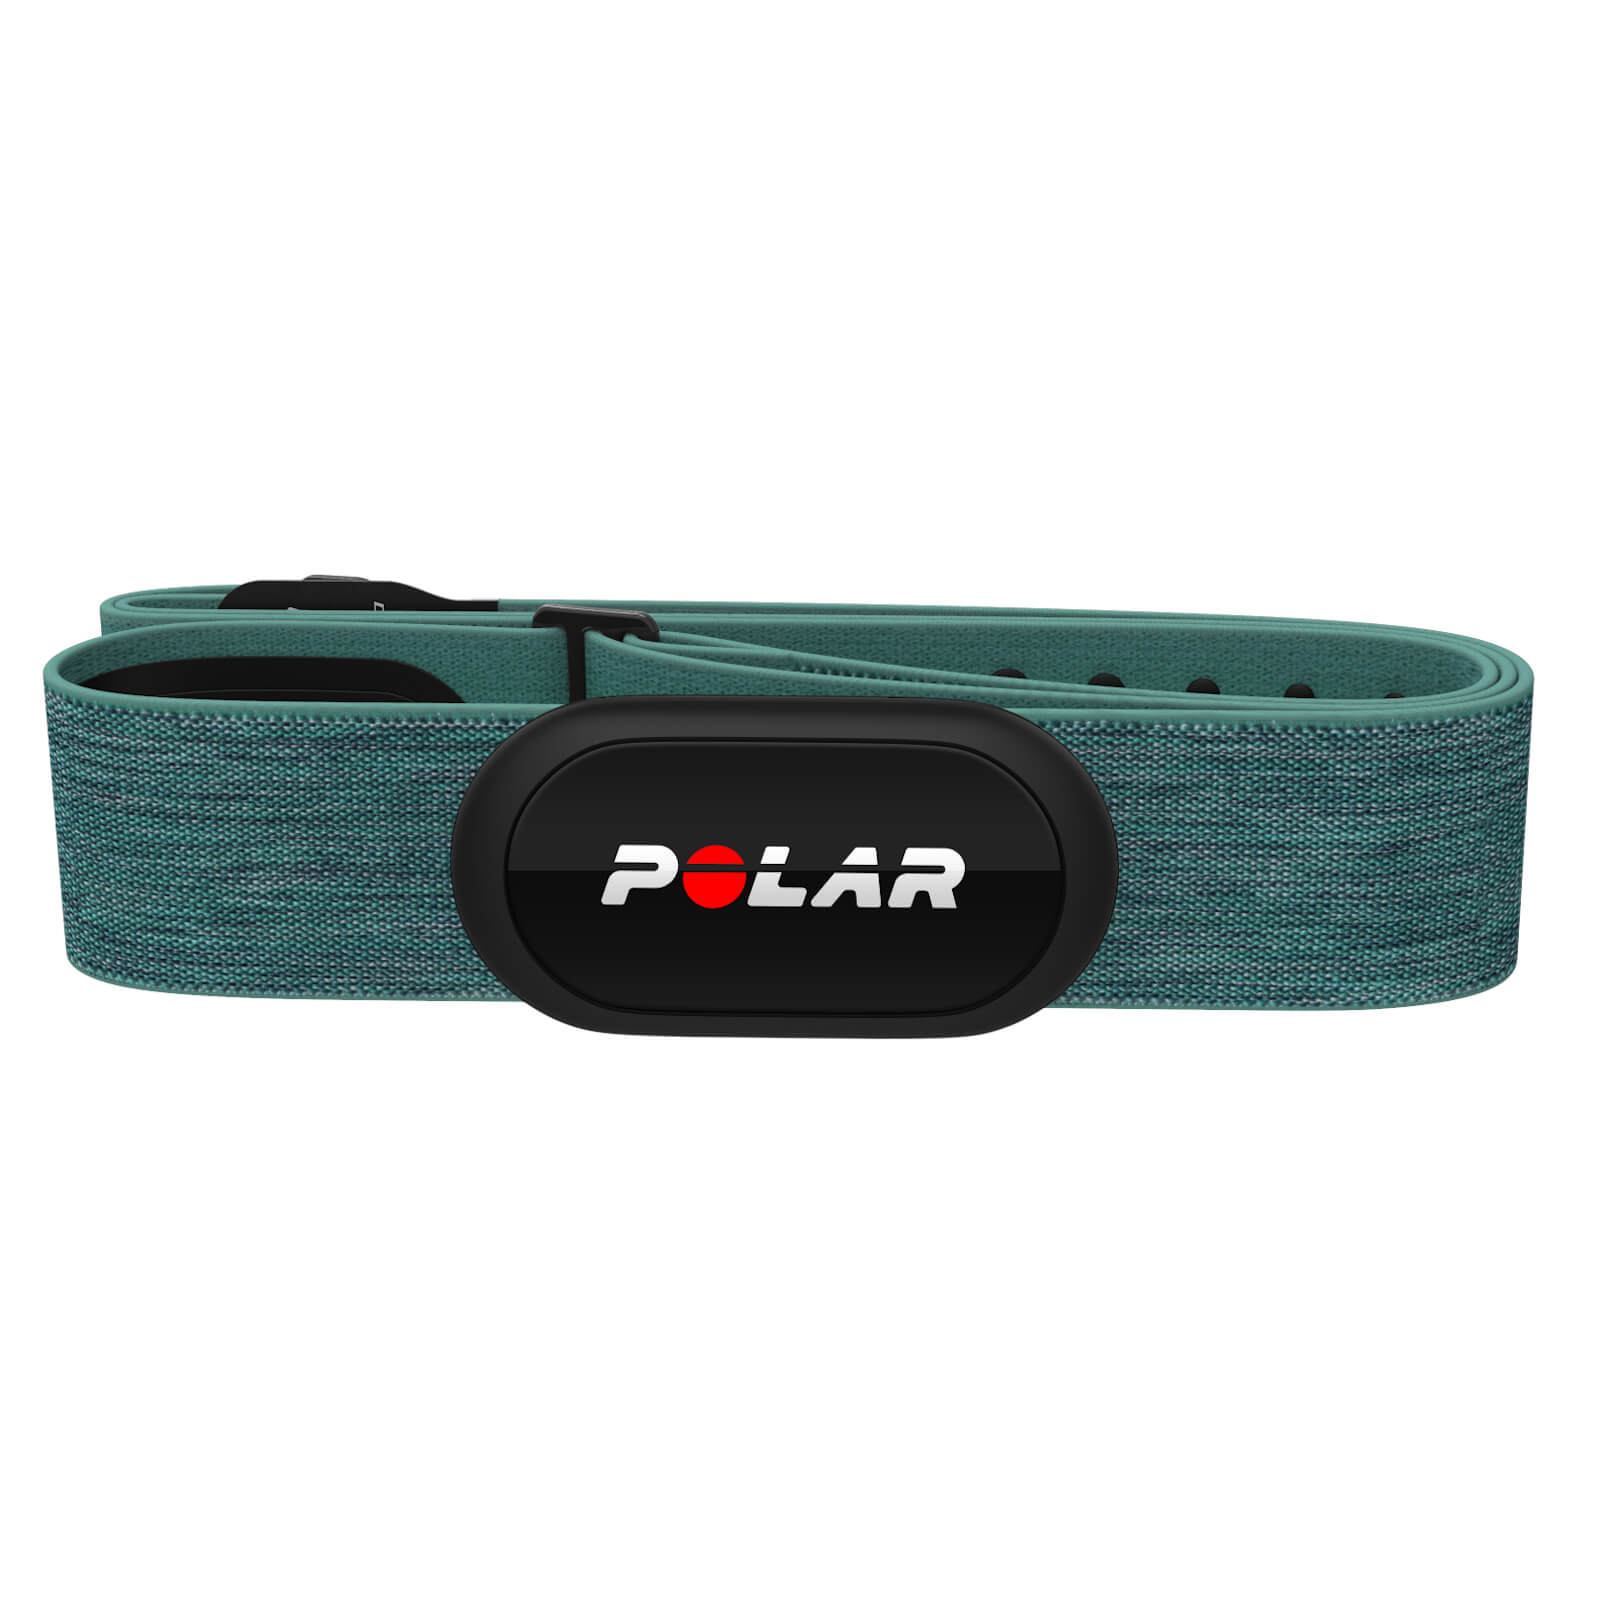 Polar H10 Ant+ Heart Rate Monitor - M-XXL - Turquoise